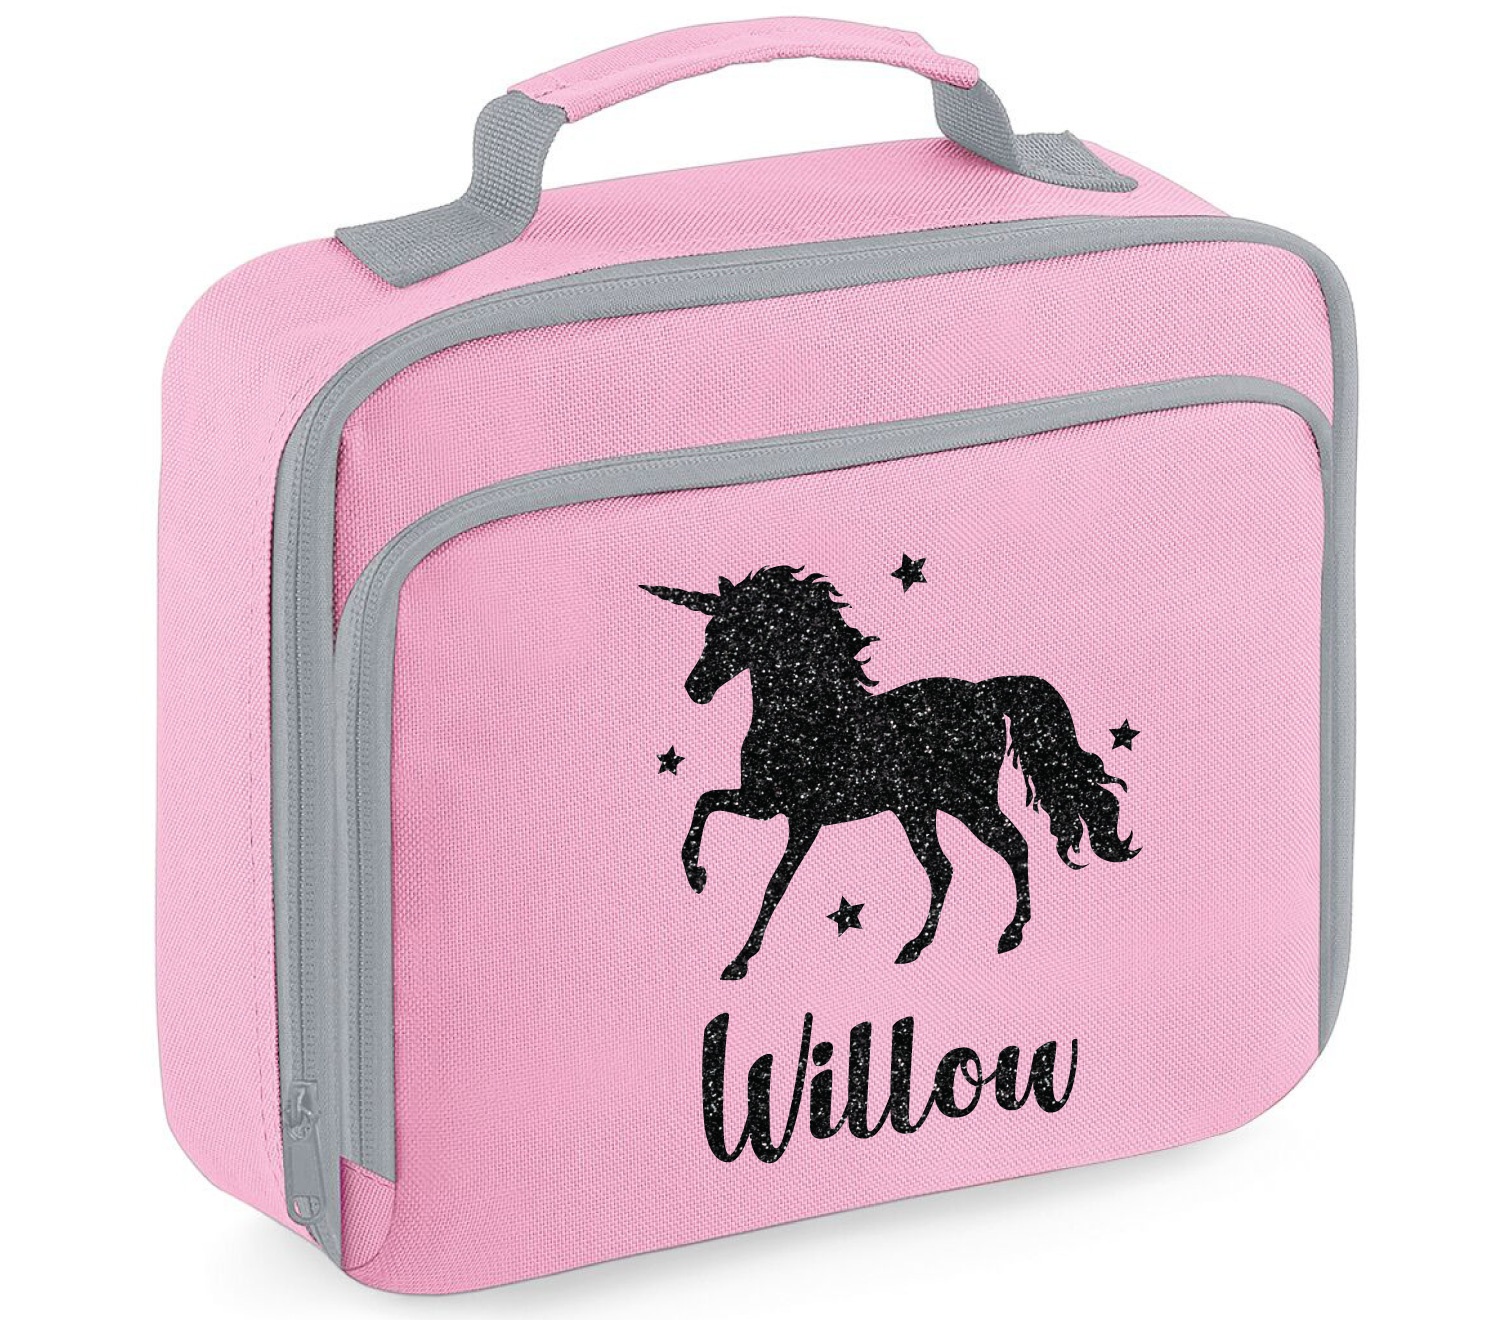 Personalised Kids Lunch Box Bag Unicorn For Girls Insulated Pink ANY NAME 